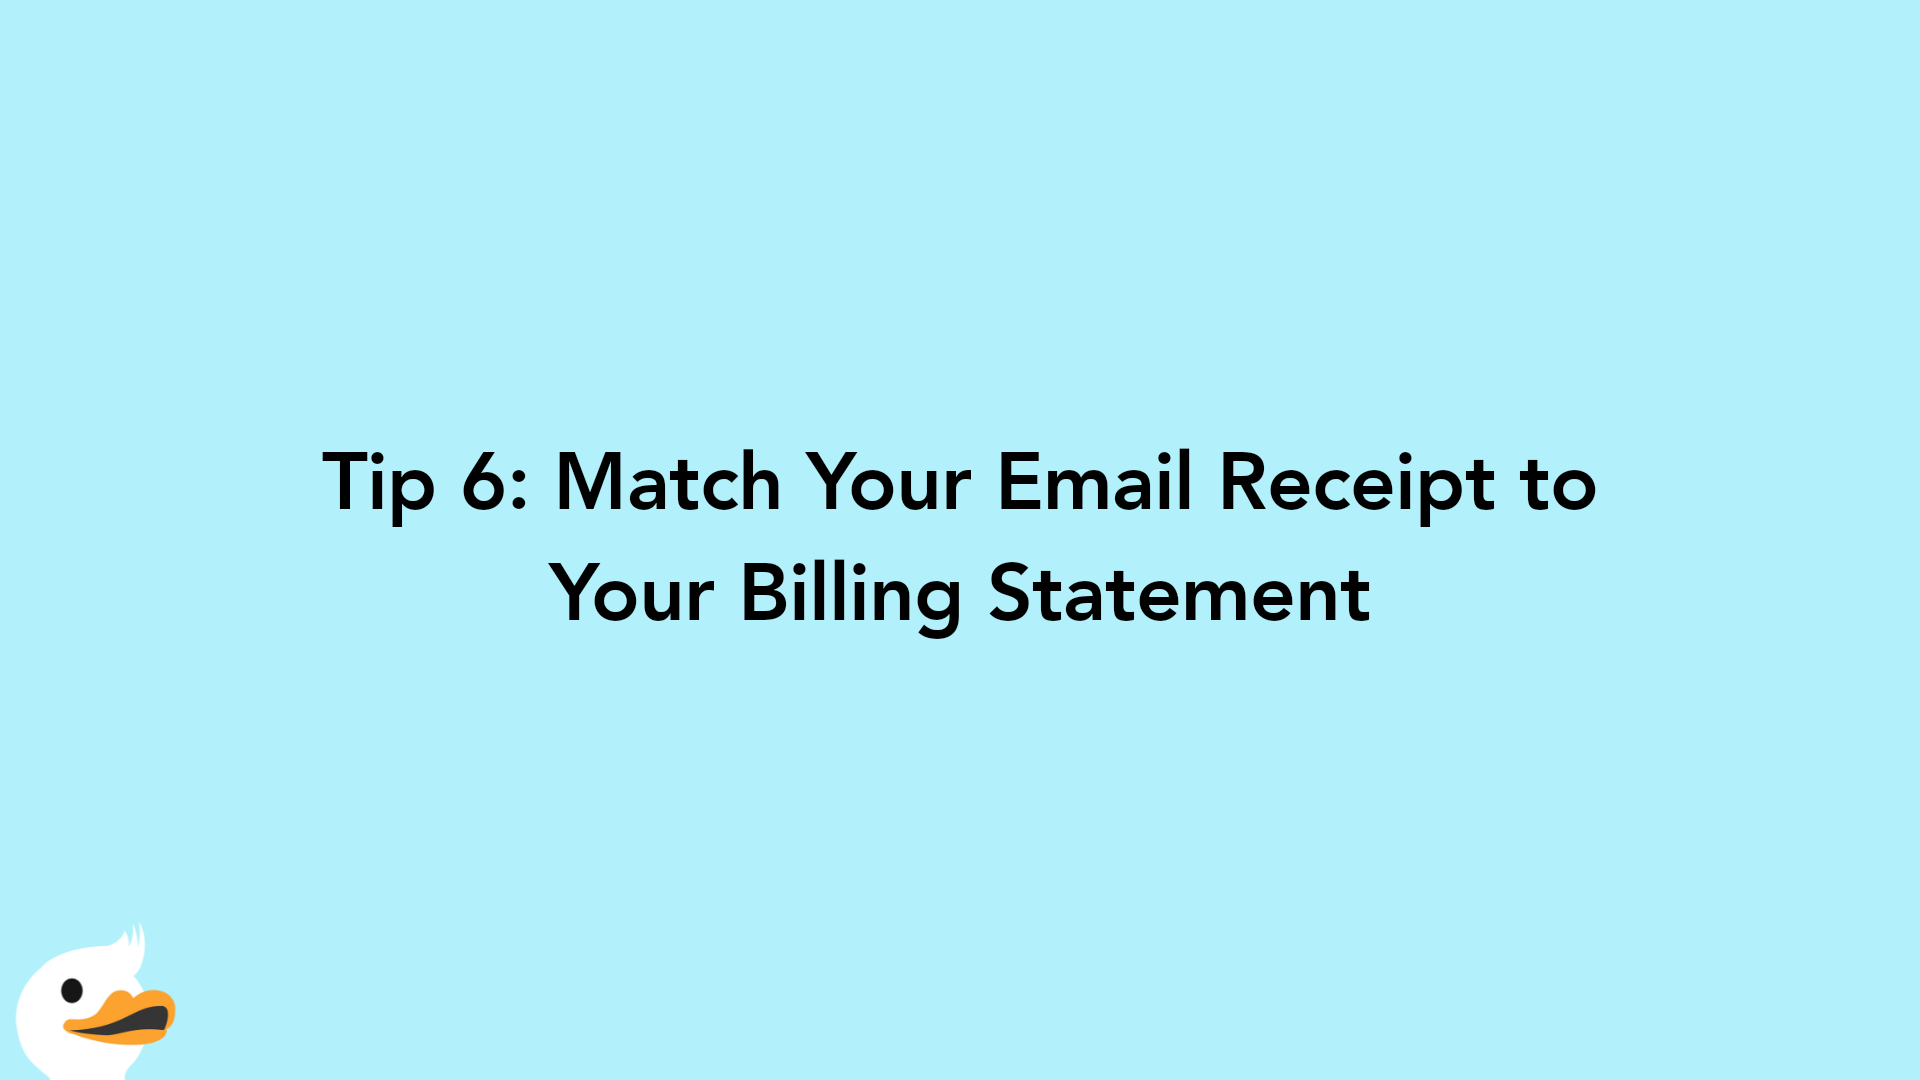 Tip 6: Match Your Email Receipt to Your Billing Statement